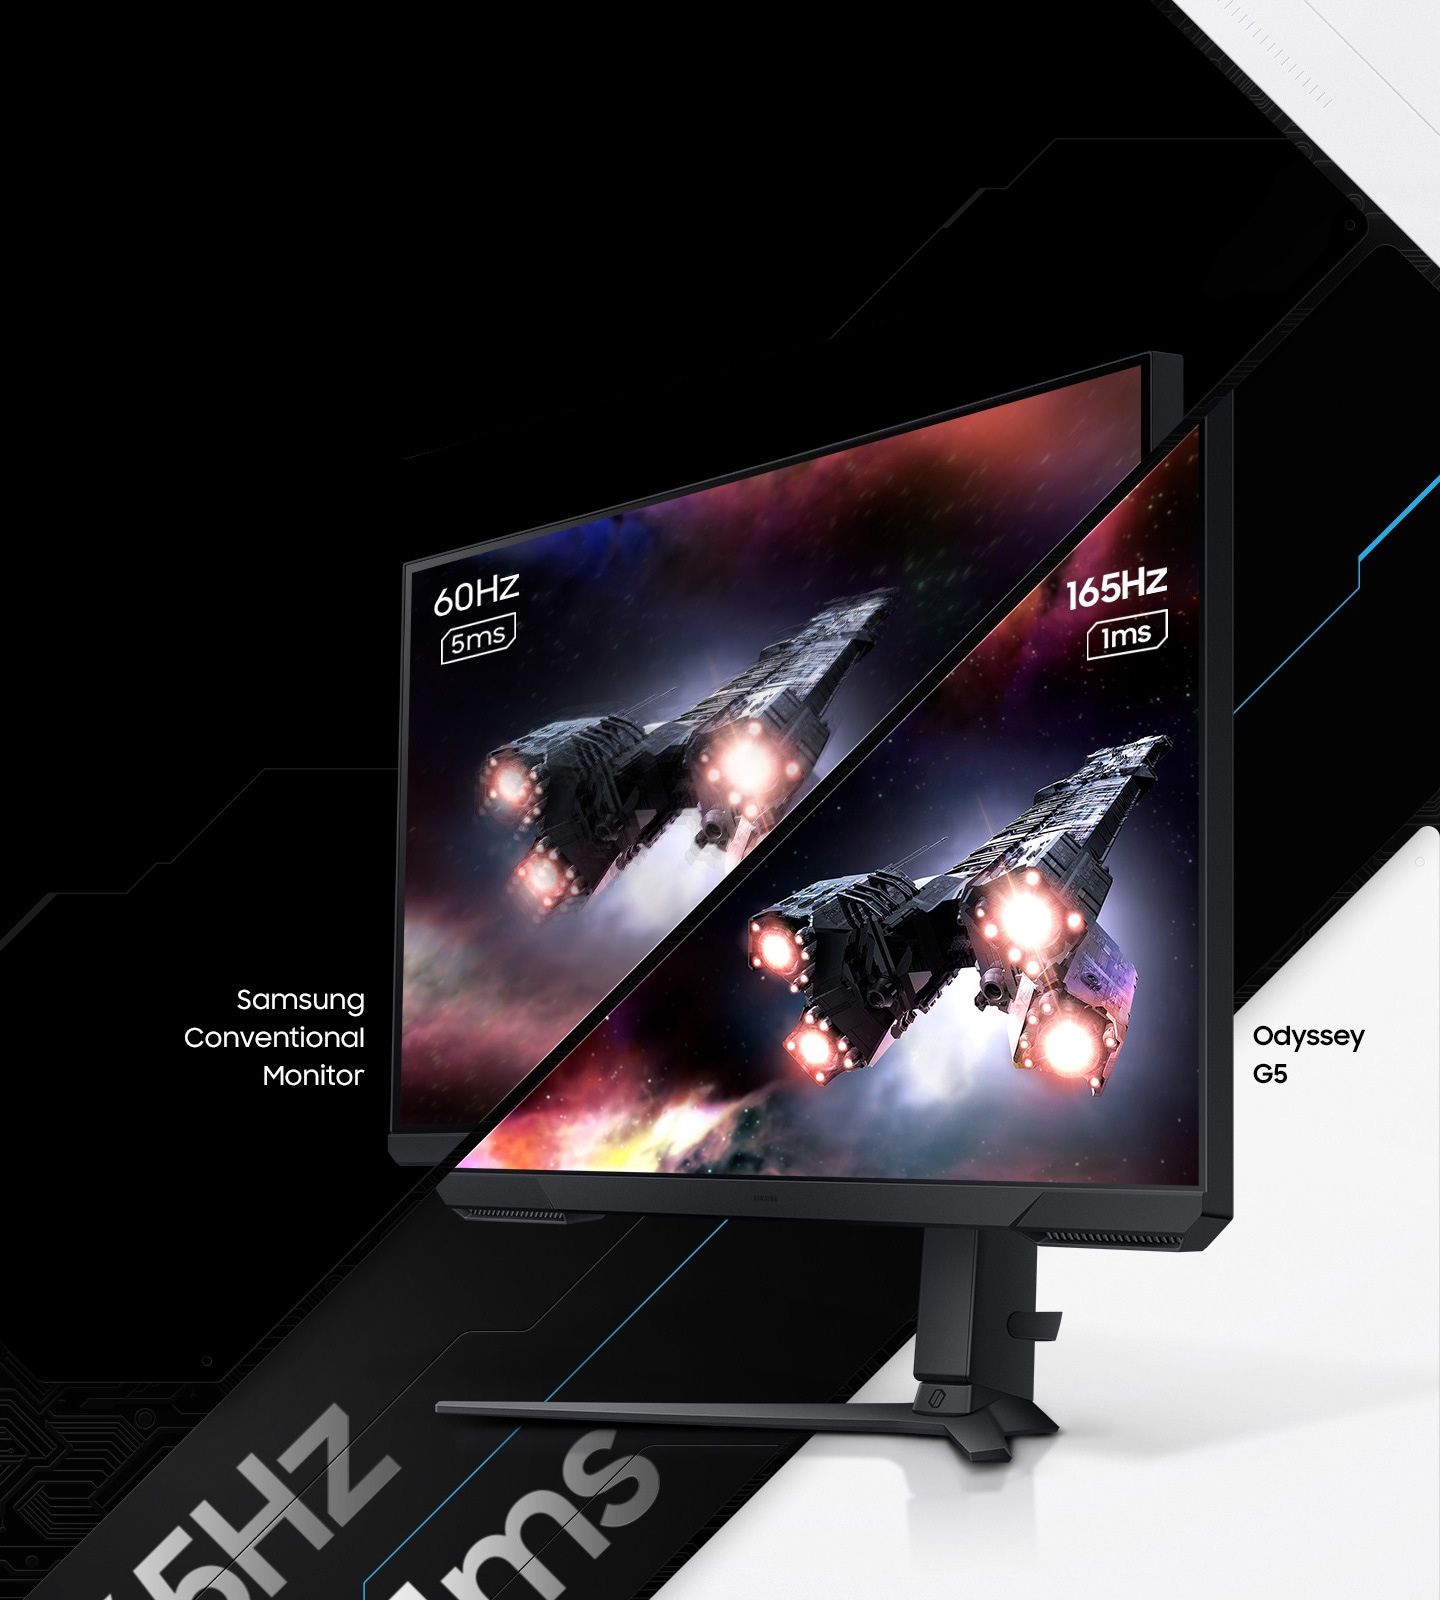 A monitor which is seen from its right side shows two spaceships blasting off into space. The monitor is split in two to show the difference in display quality comparing two different refresh rates and response time, one for Samsung conventional monitor with 60Hz and 5ms and the other for Odyssey G5 with 165Hz and 1ms.